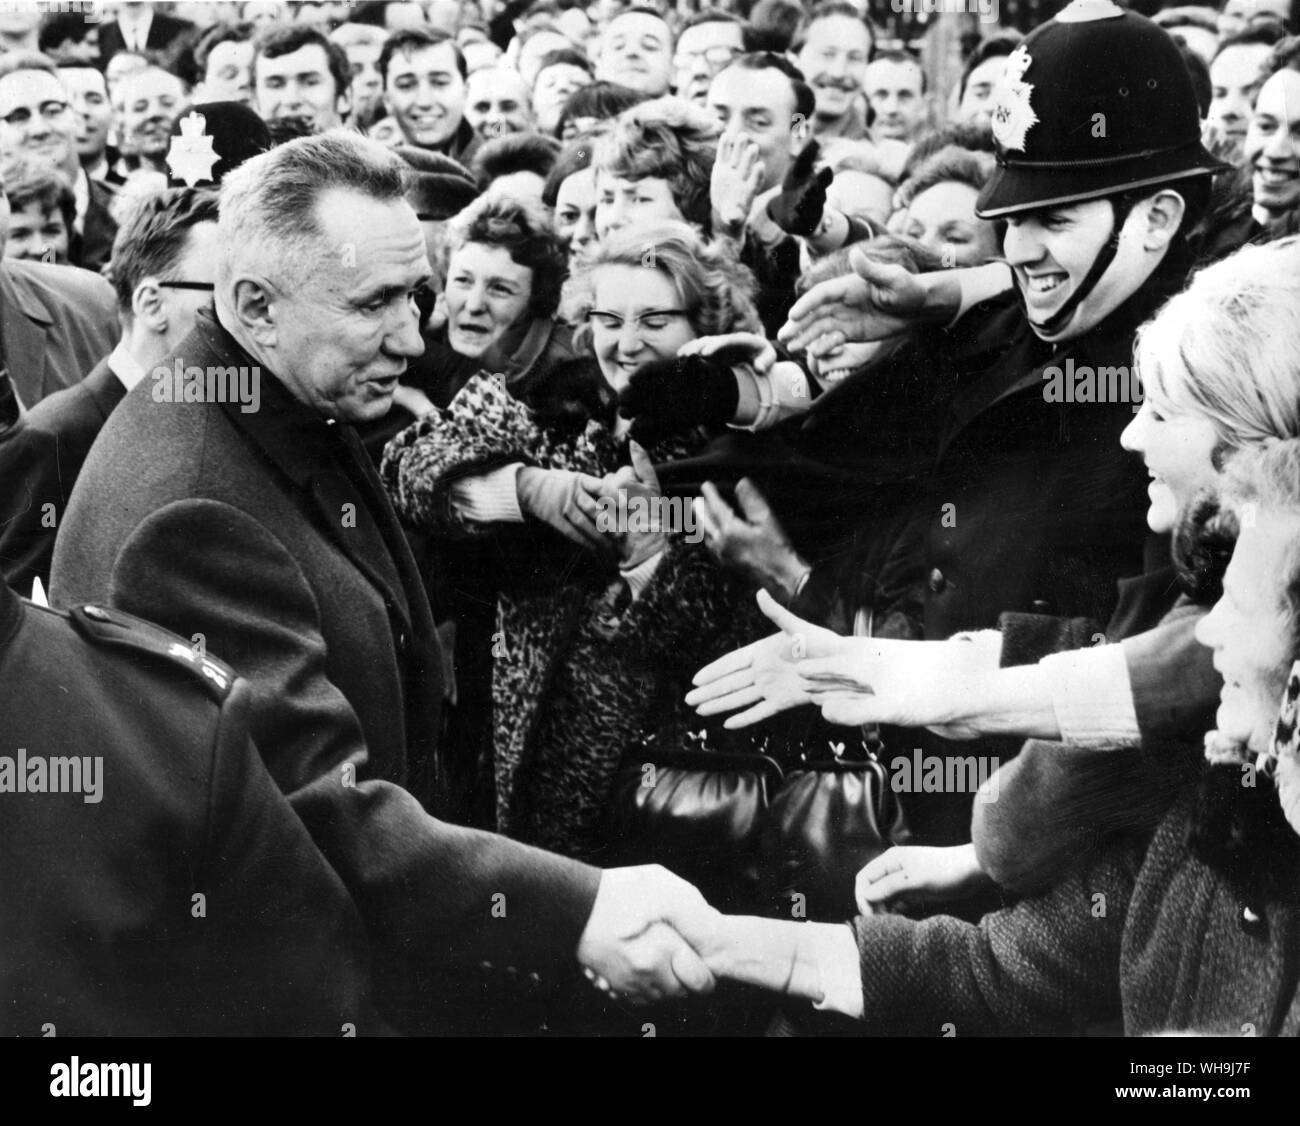 8th feb 1967) Borehamwood, Hertfordshire: Alexei Kosygin (1904-1980), Soviet politician, prime-minister 1964-80. He shakes hands with workers who build computers. Stock Photo